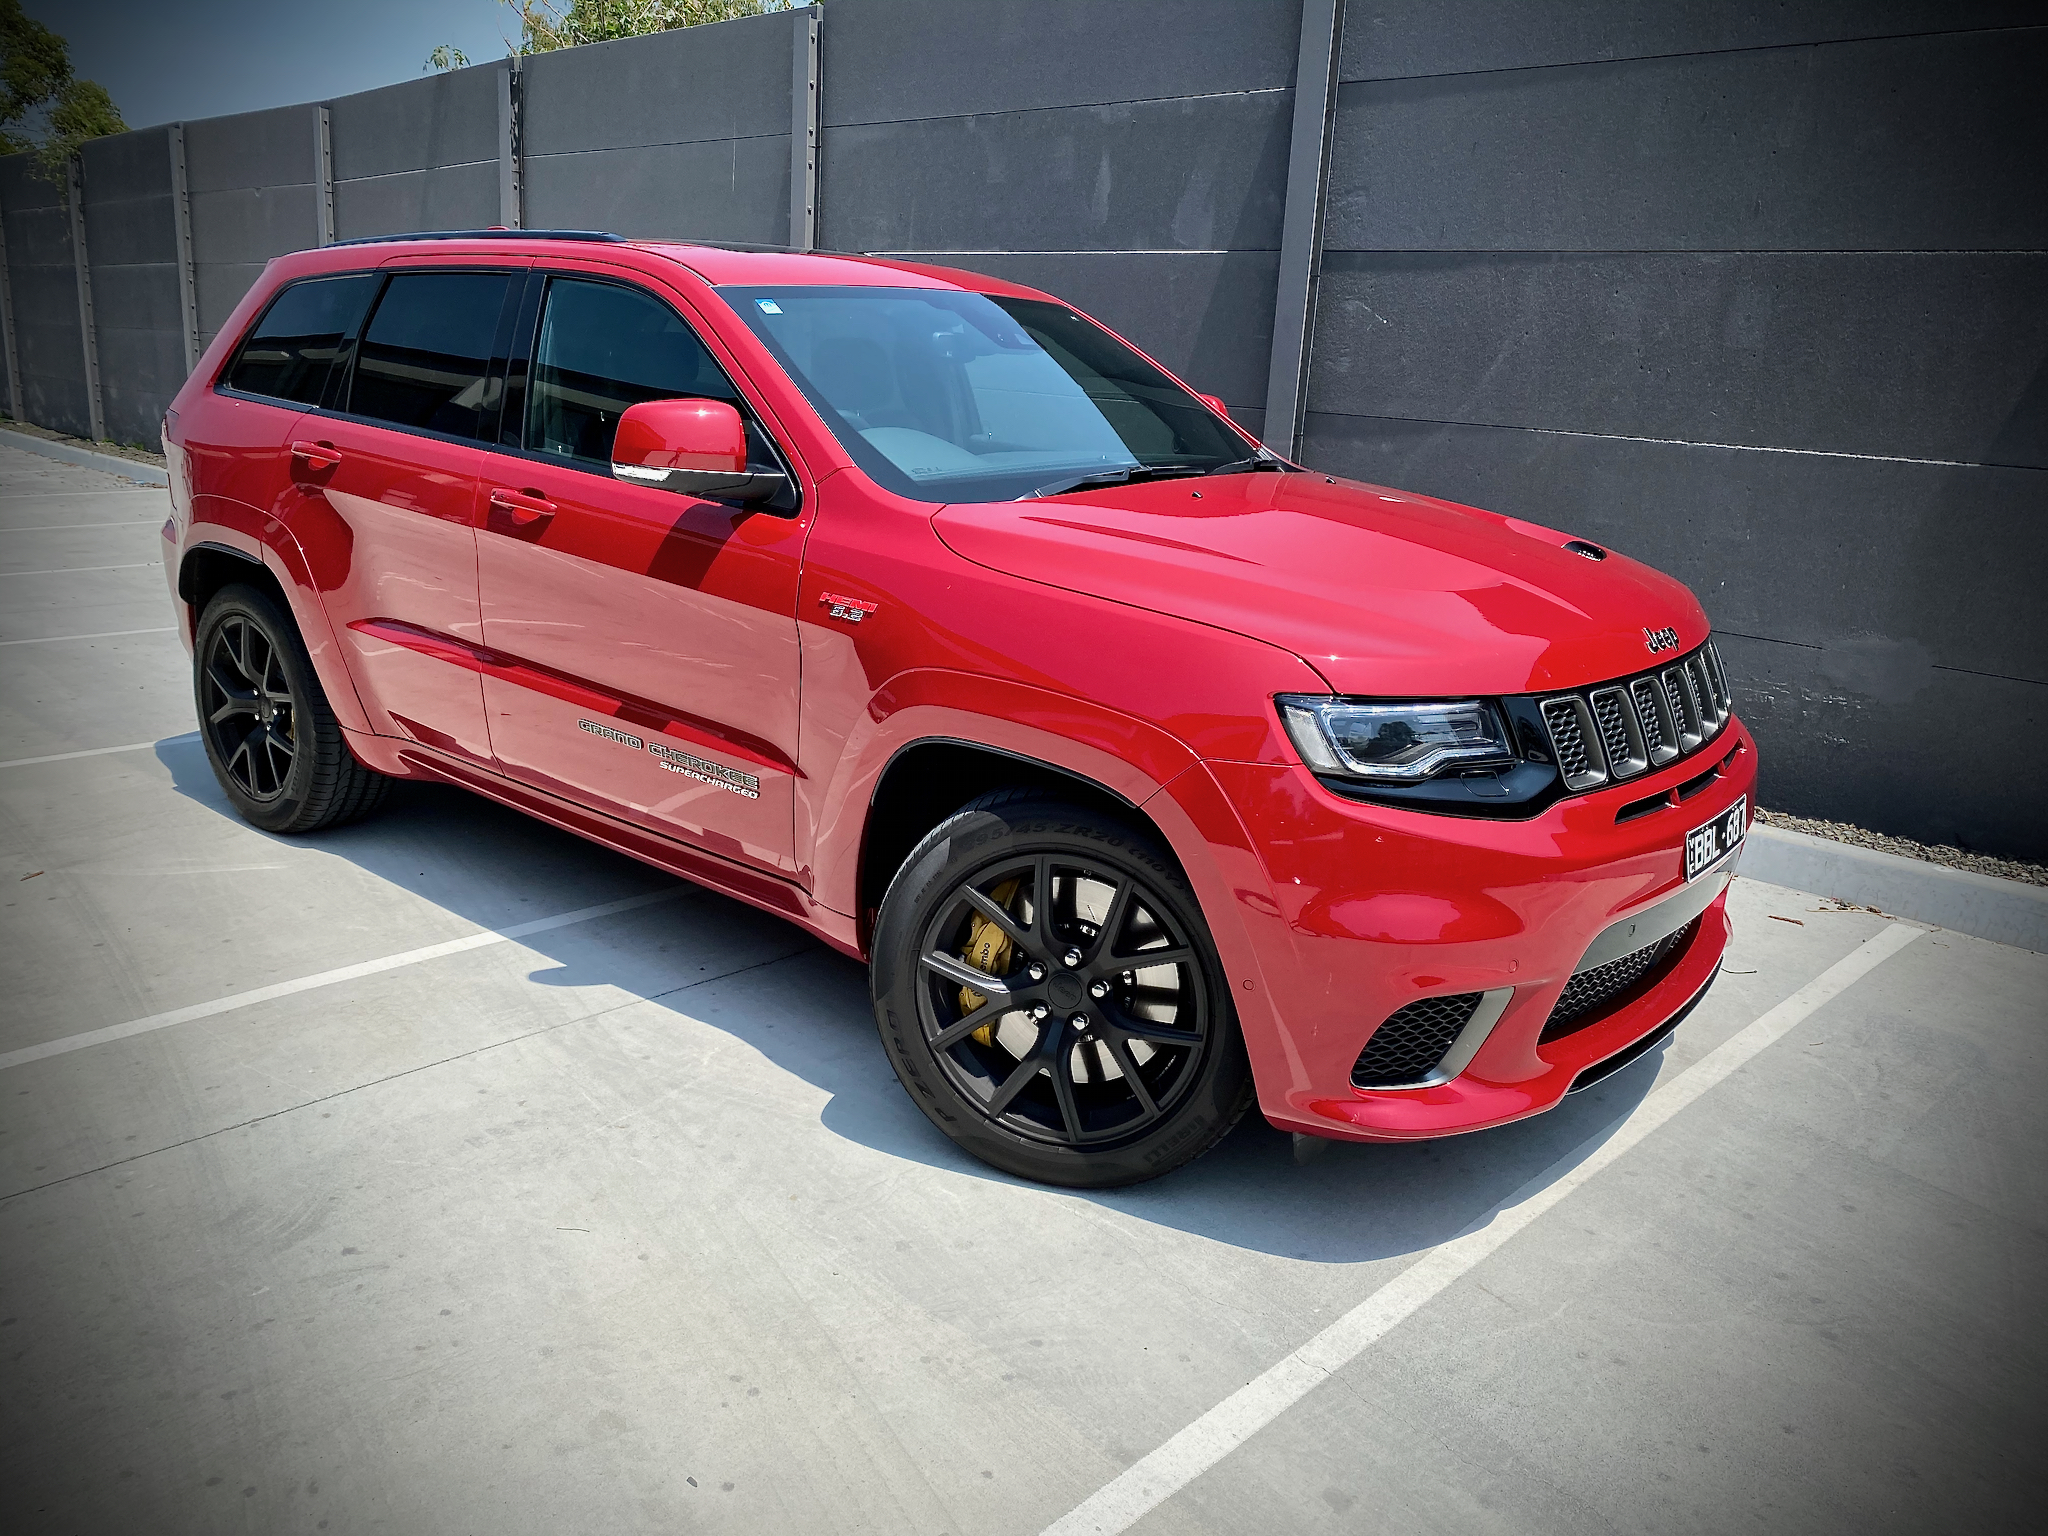 2021 Jeep Grand Cherokee SRT SUV Interior Review - Seating, Infotainment,  Dashboard and Features | CarIndigo.com